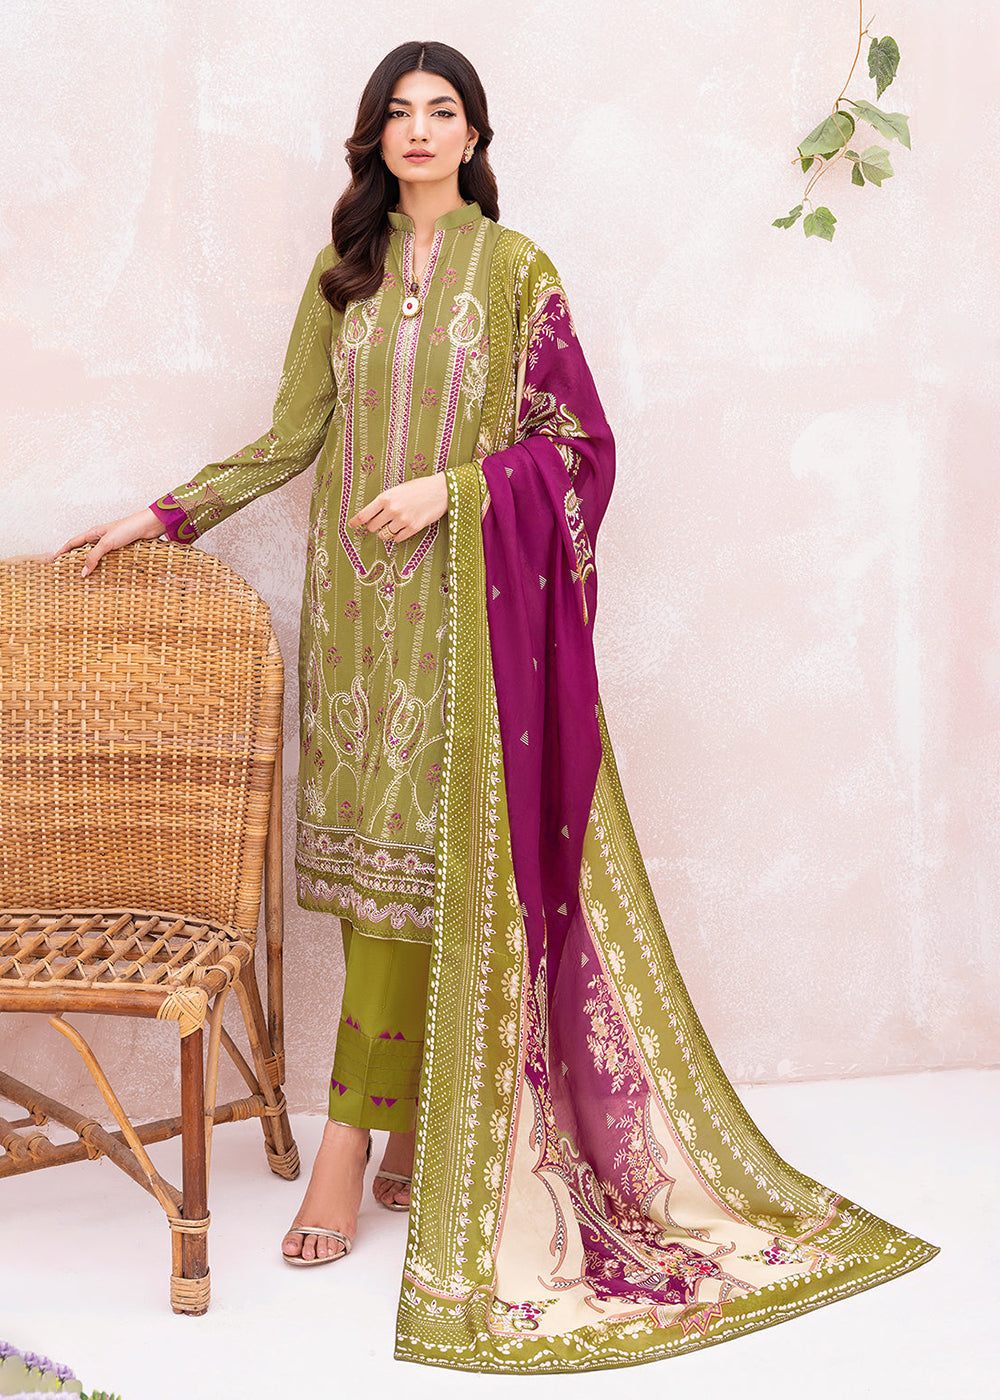 Buy Now Green Pakistani Salwar Suit - Ramsha Mashaal Collection Vol 7 - #L-707 Online in USA, UK, Canada & Worldwide at Empress Clothing.